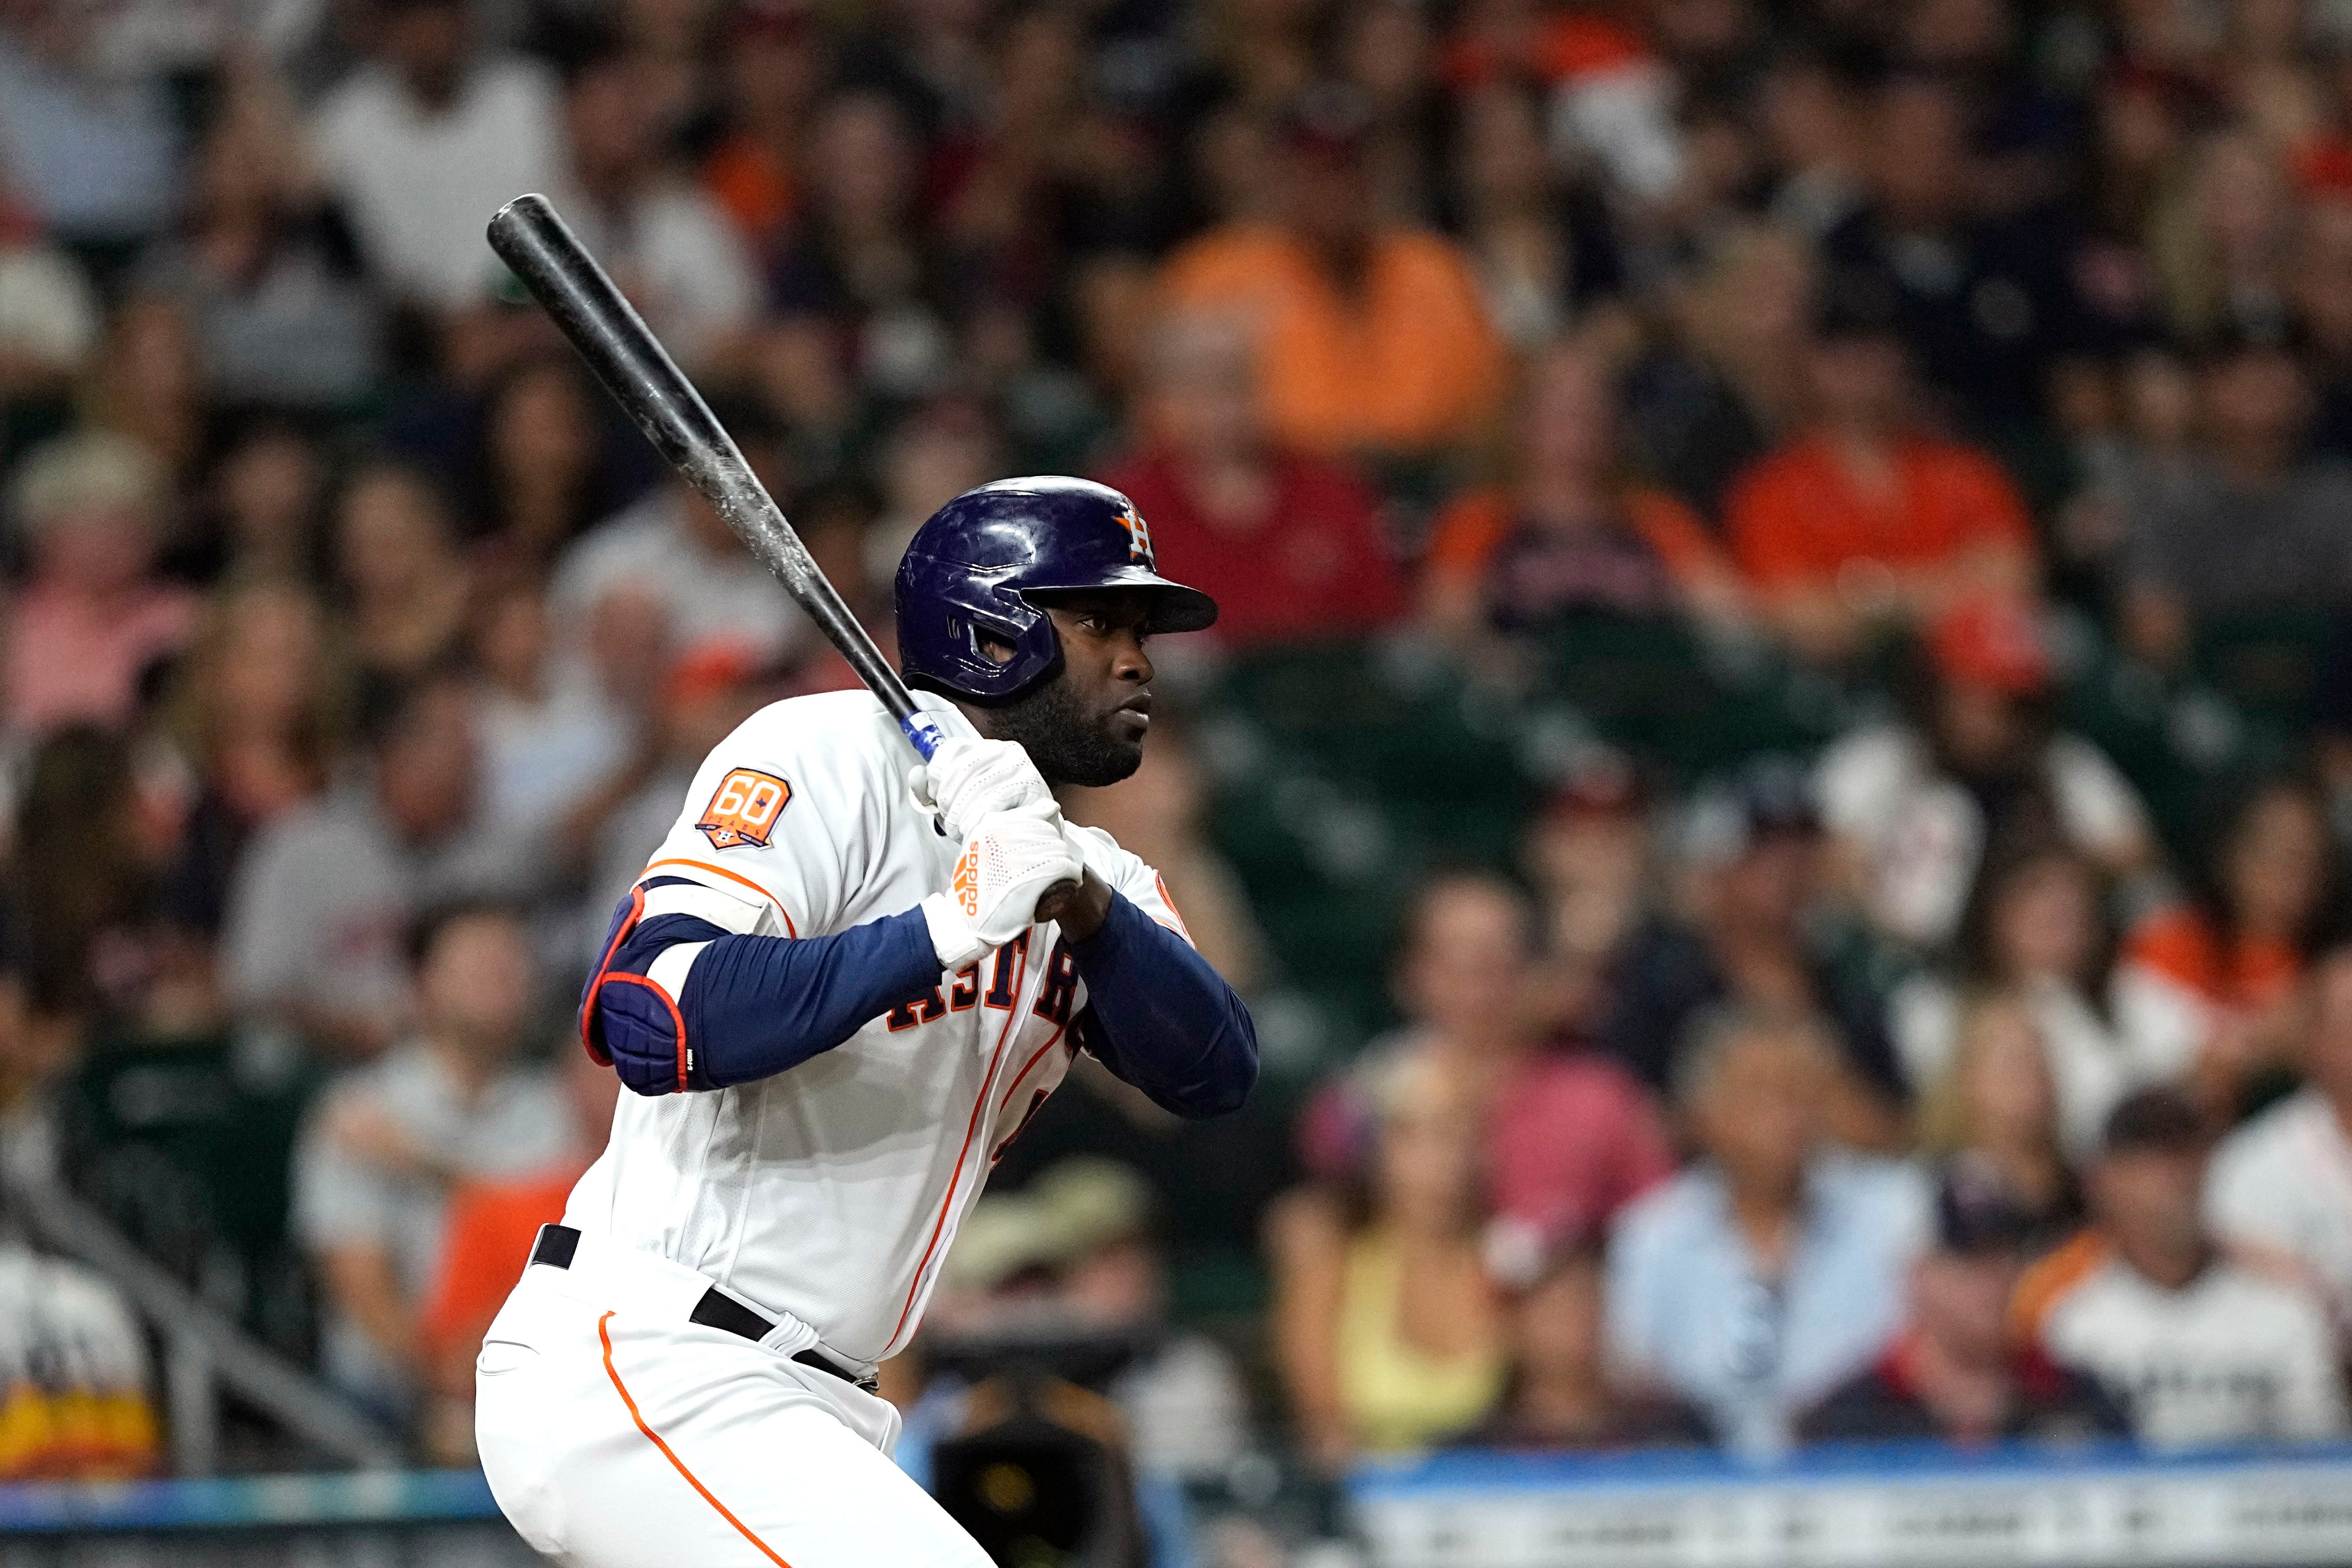 Yordan Alvarez's parents watch son play in MLB for 1st time